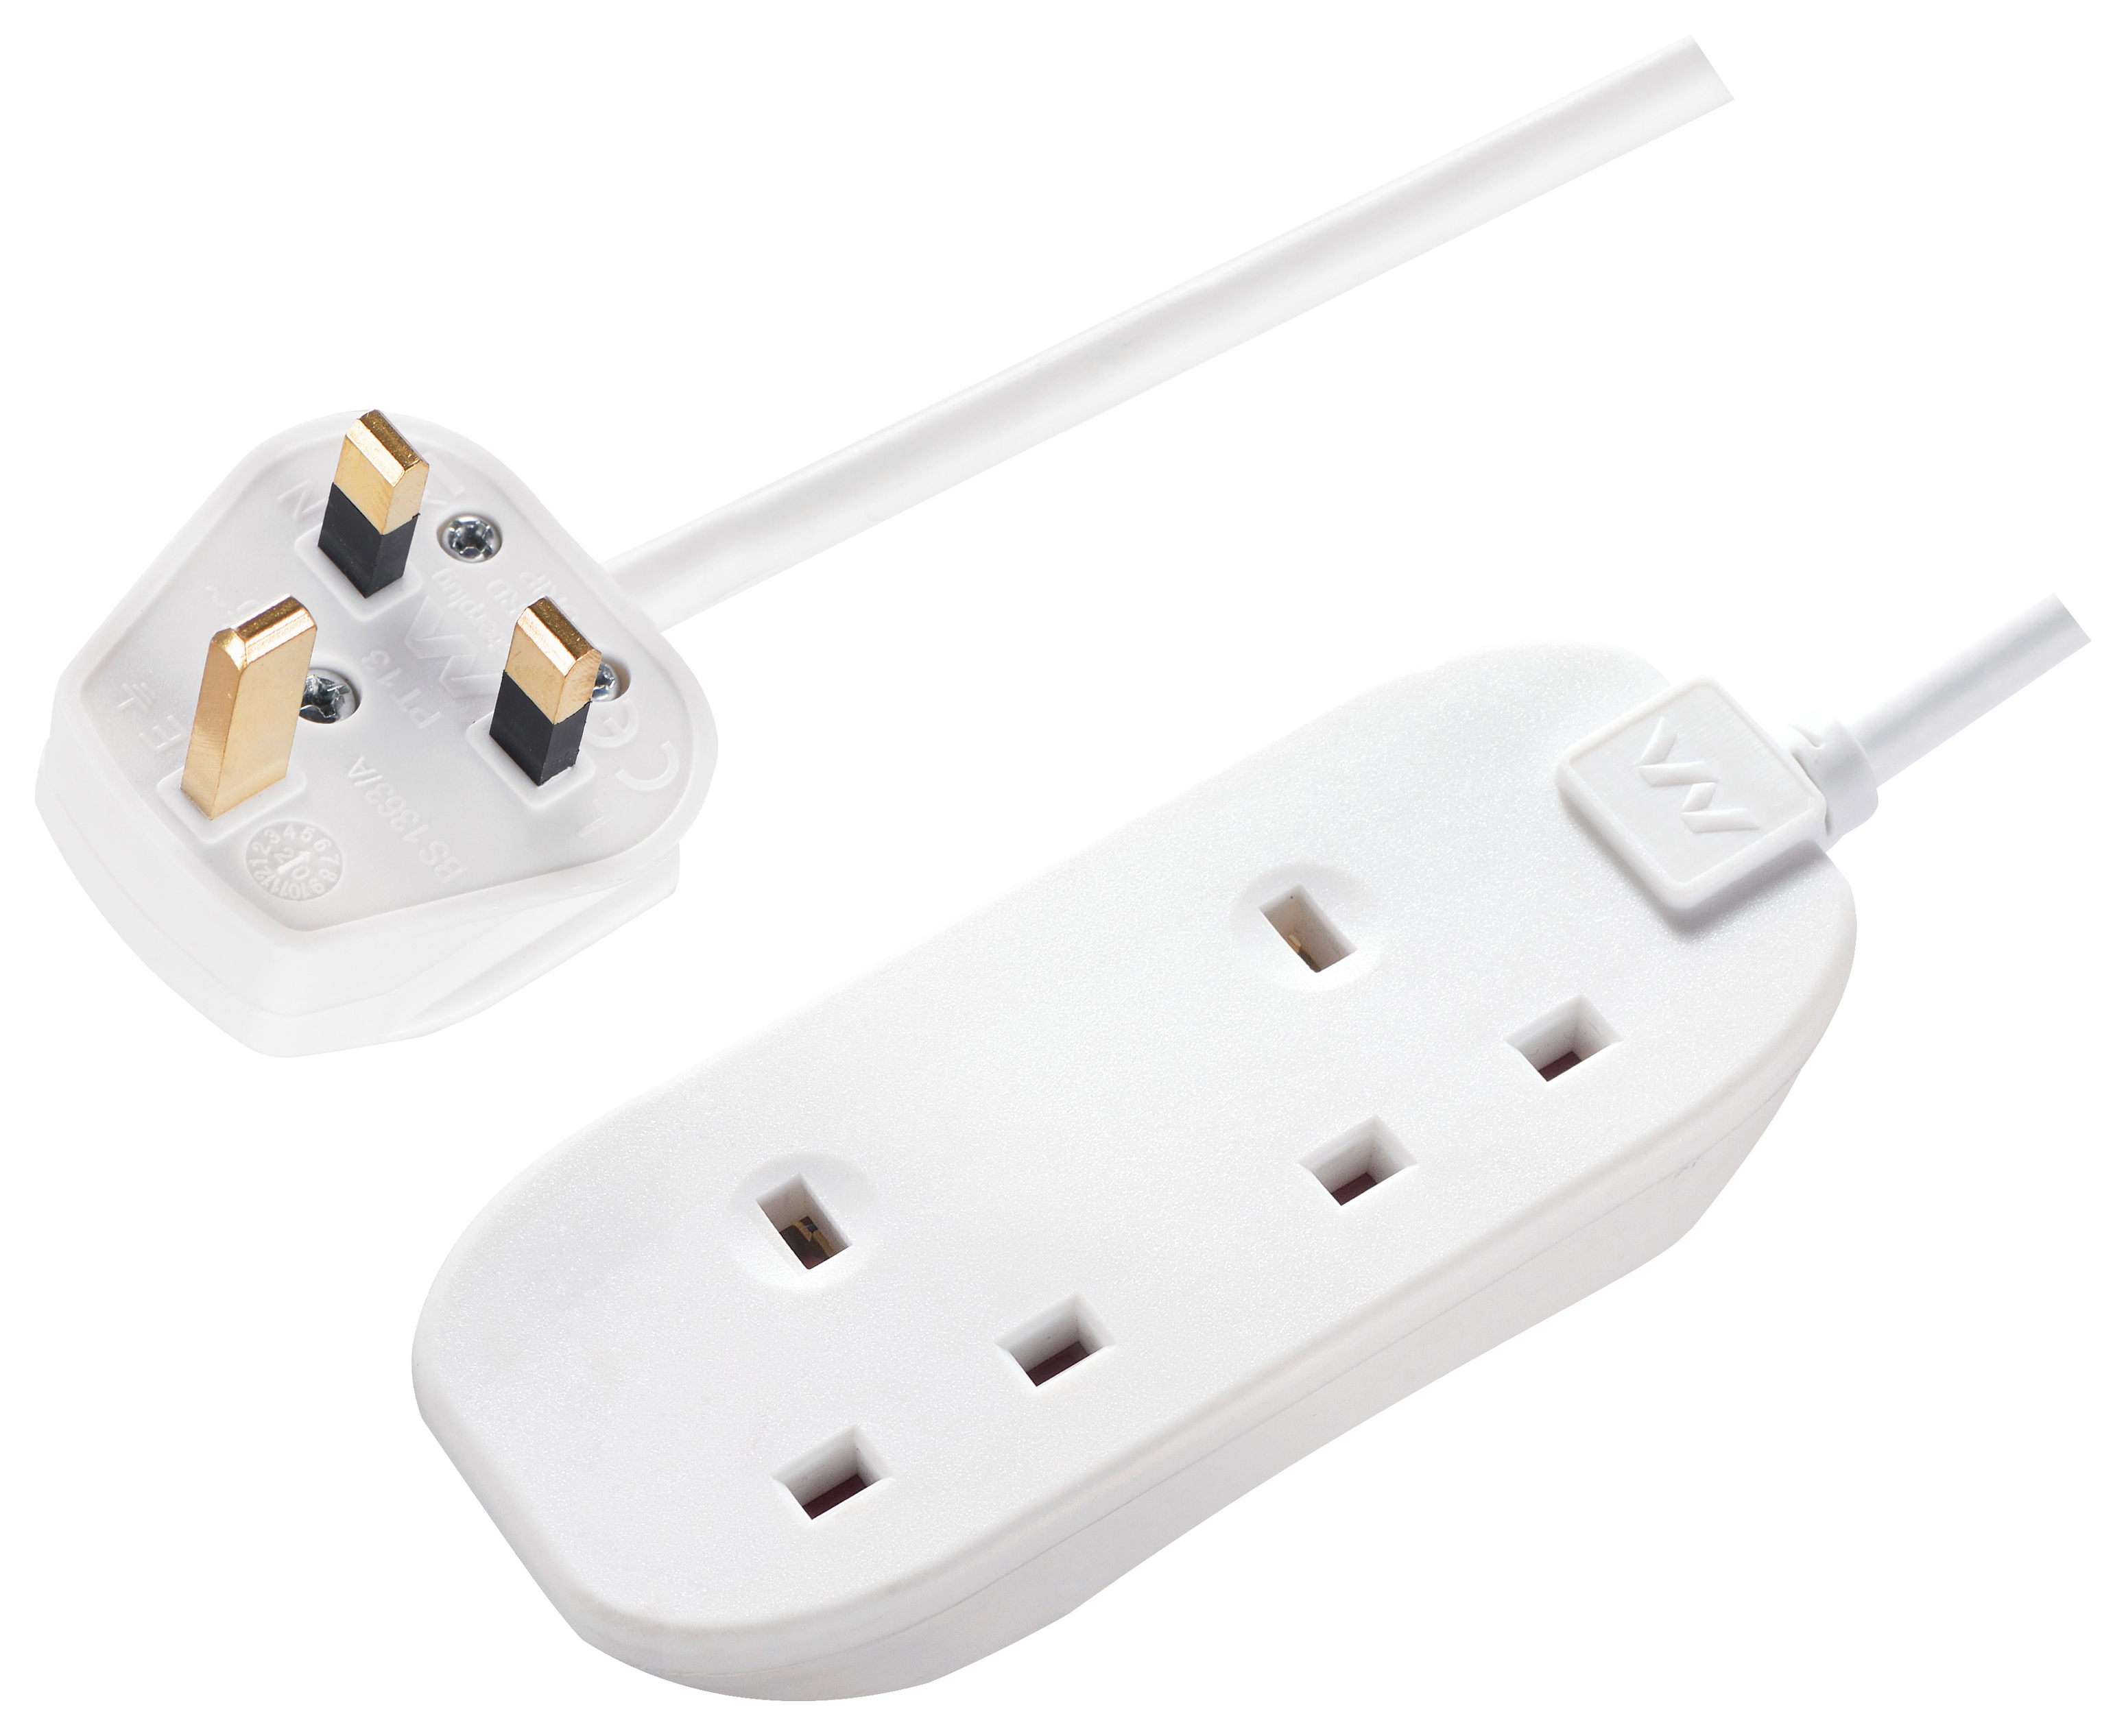 Image of Masterplug 2 Socket Extension Lead - White 3m 13A